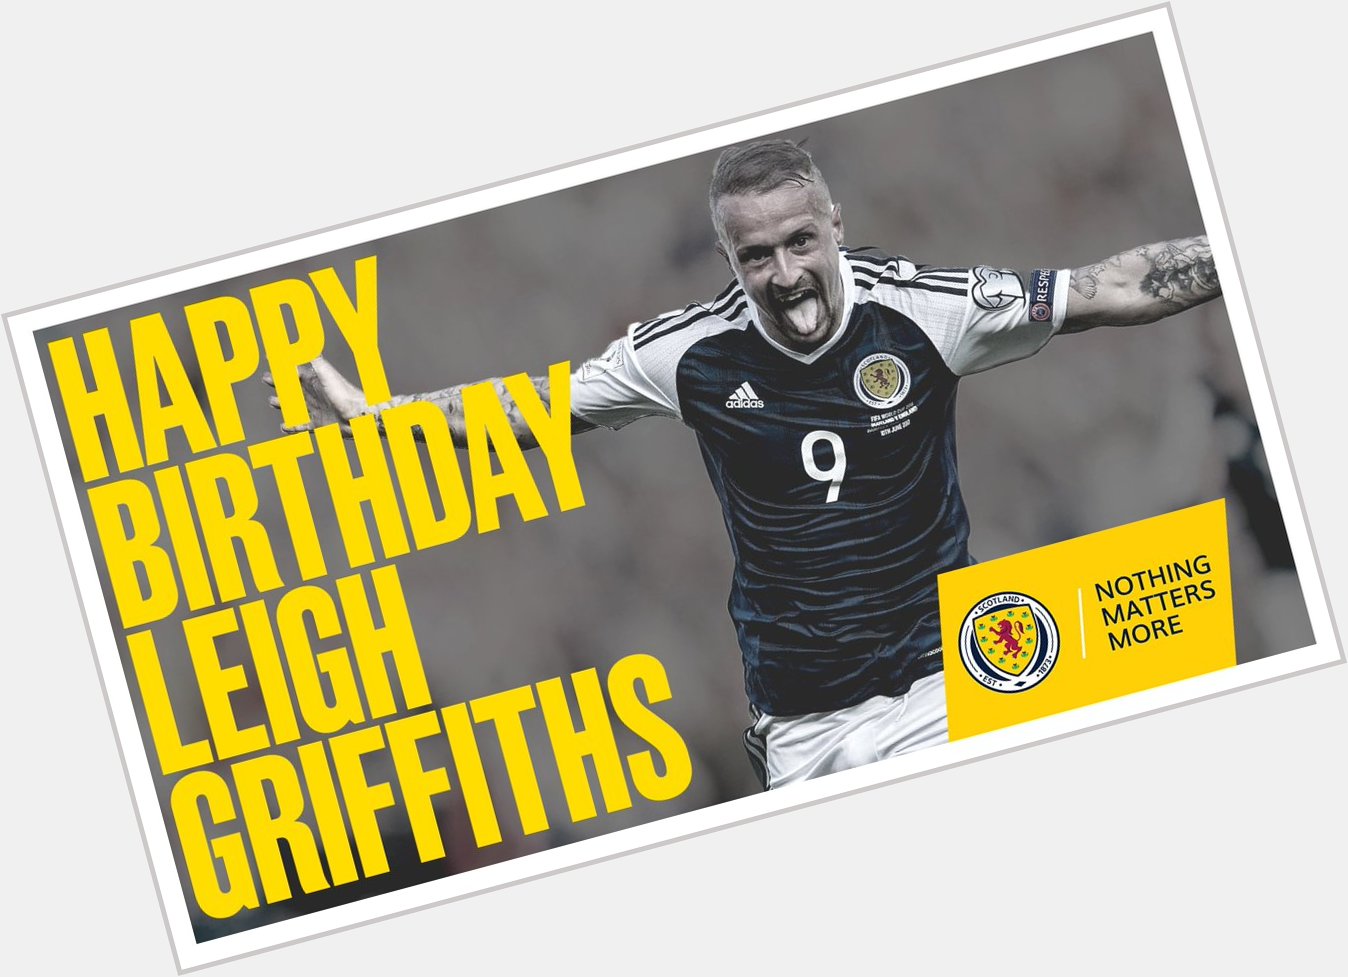  | Wishing a Happy Birthday to Scotland forward Leigh Griffiths!

Have a good one         